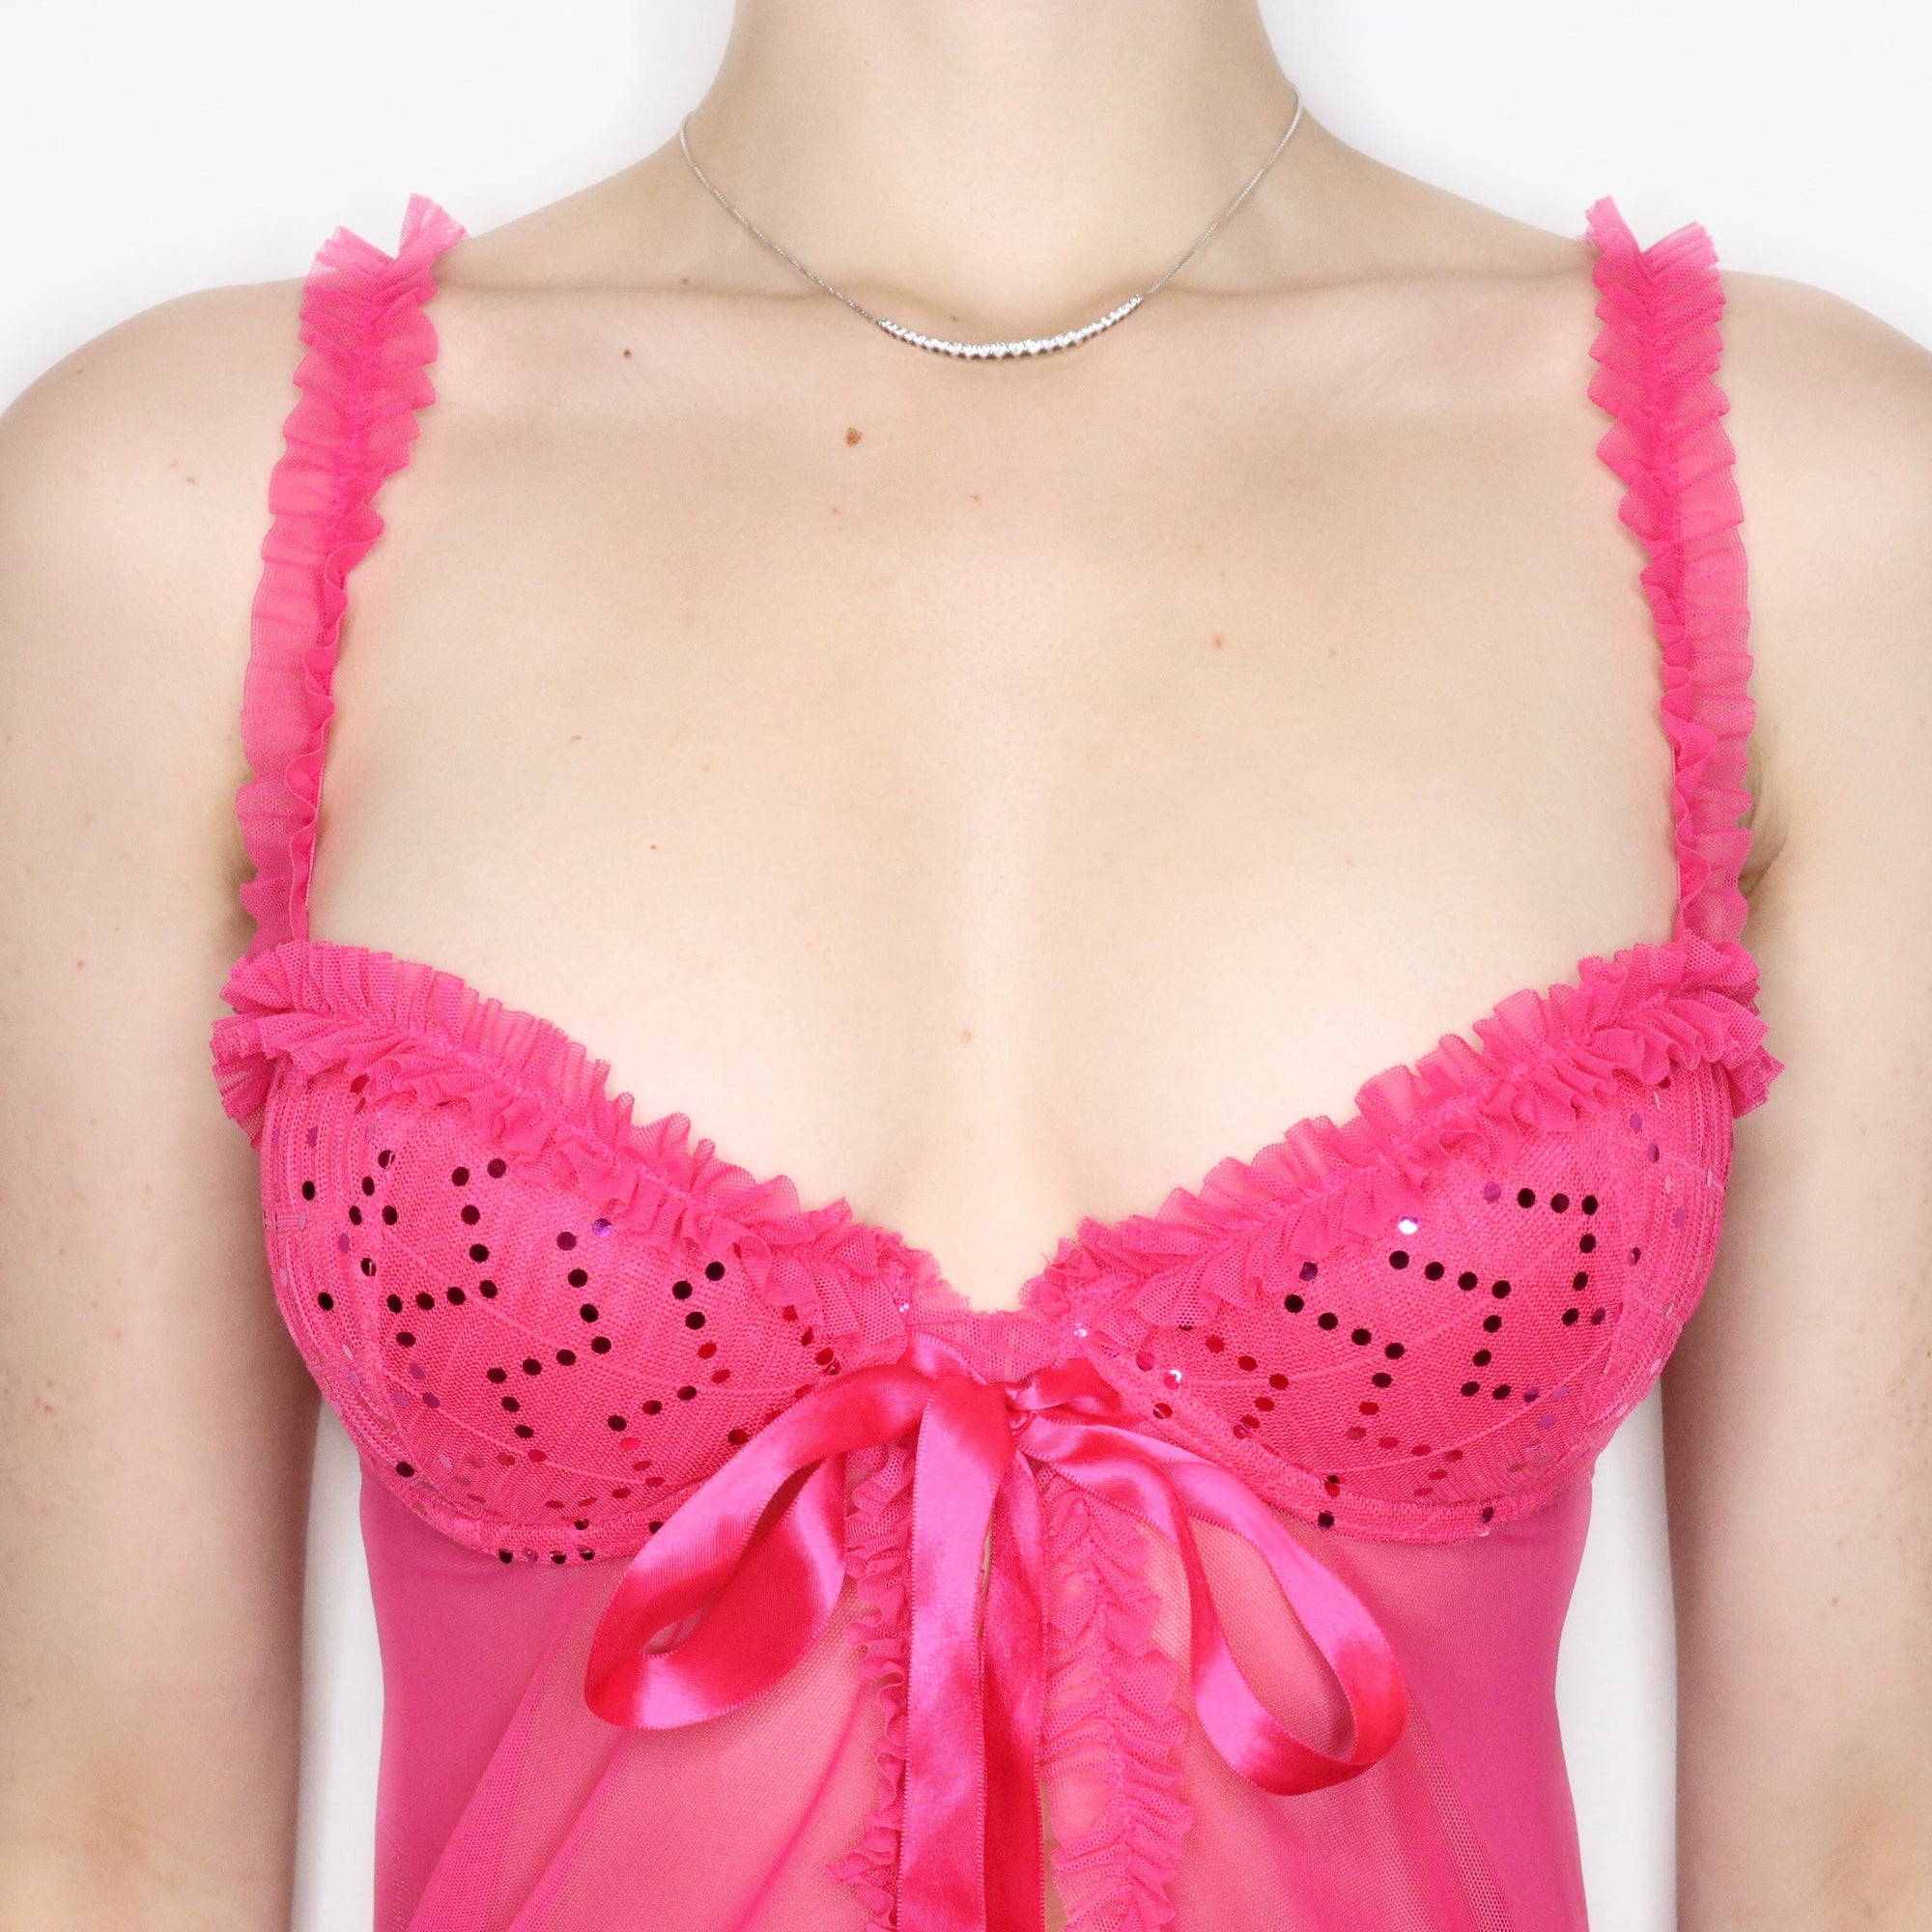 Late 2000s Victoria's Secret Hot Pink Mesh Babydoll Bustier